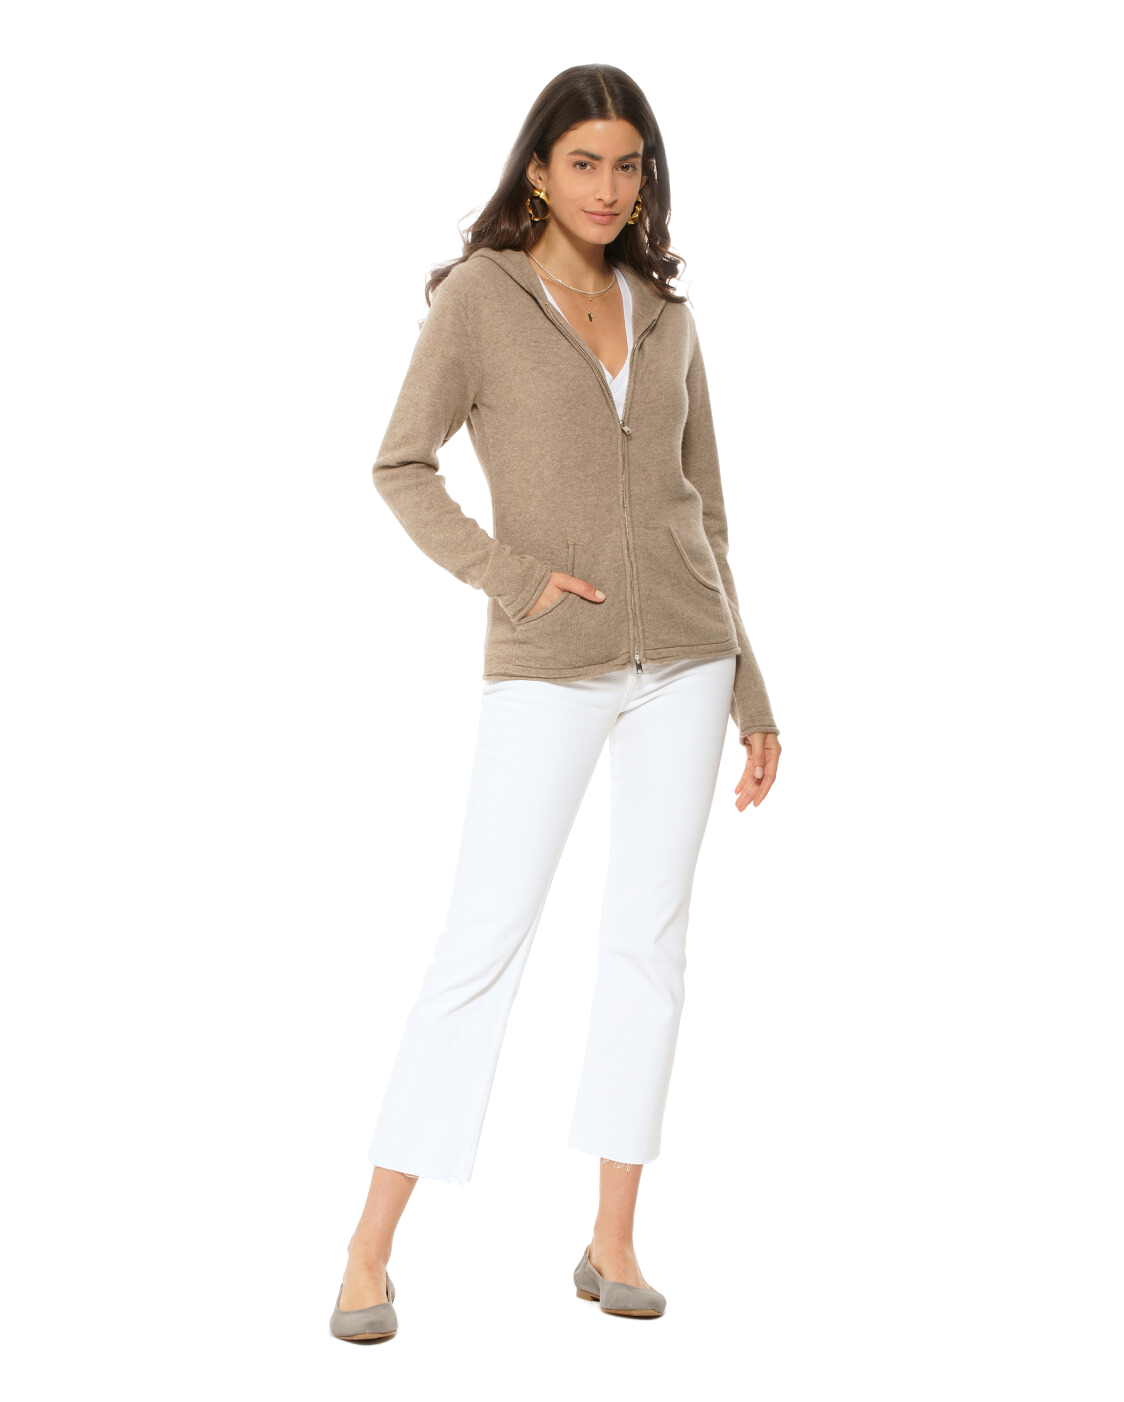 Monticelli Women's Pure Cashmere Hoodie Sweater Taupe 4